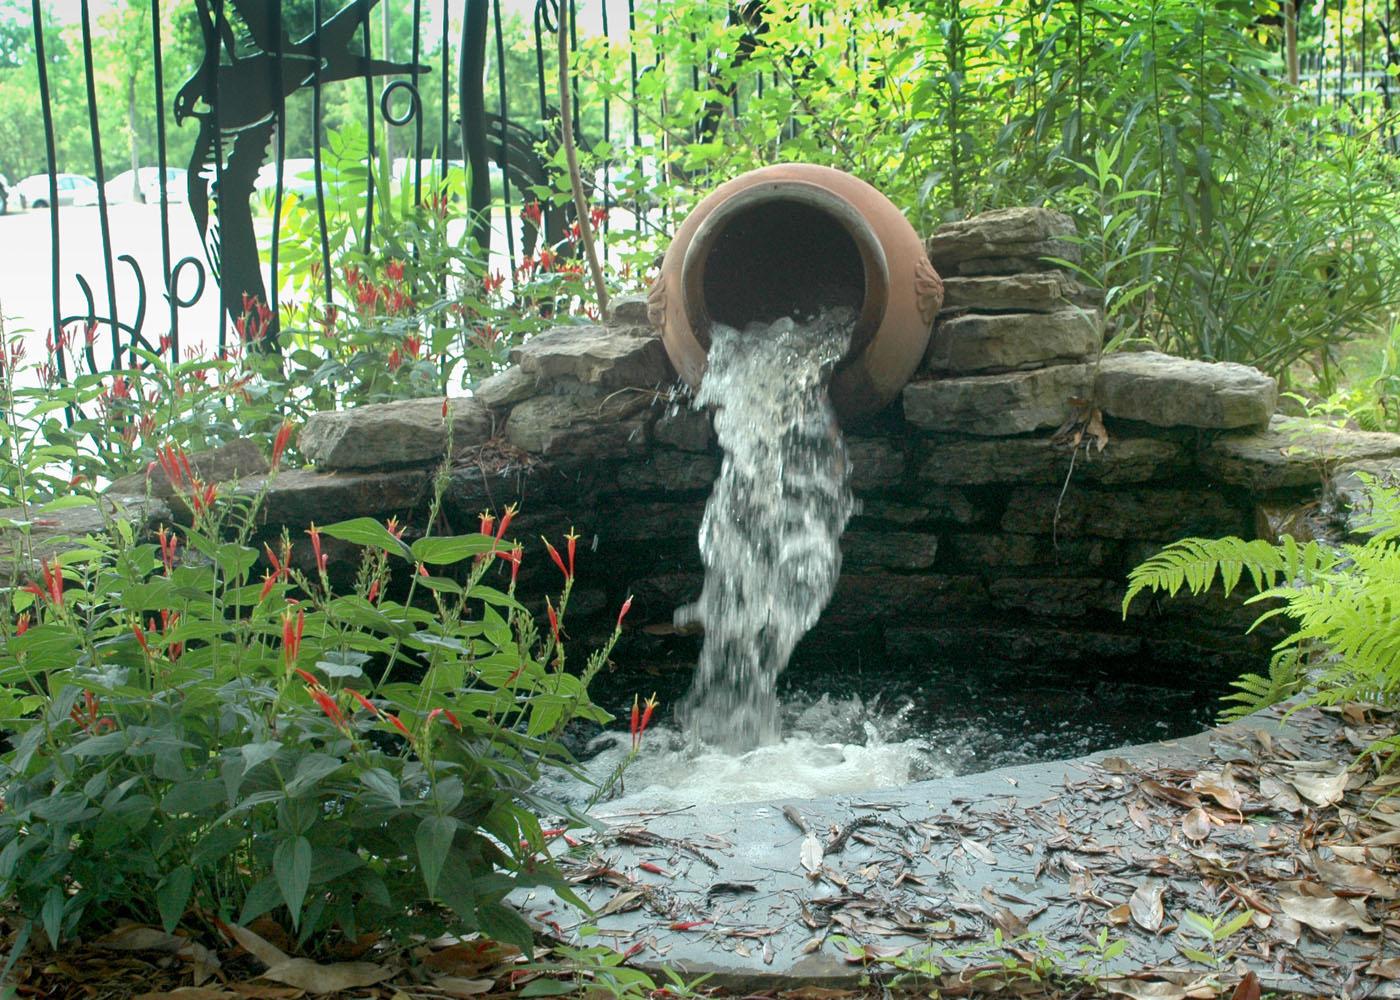 Creating a water feature, such as this one at the Mississippi Museum of Natural Science in Jackson, is one way to incorporate water into a backyard wildlife habitat for animals to bathe in and drink. (Photo by MSU Ag Communications/ Susan Collins-Smith)